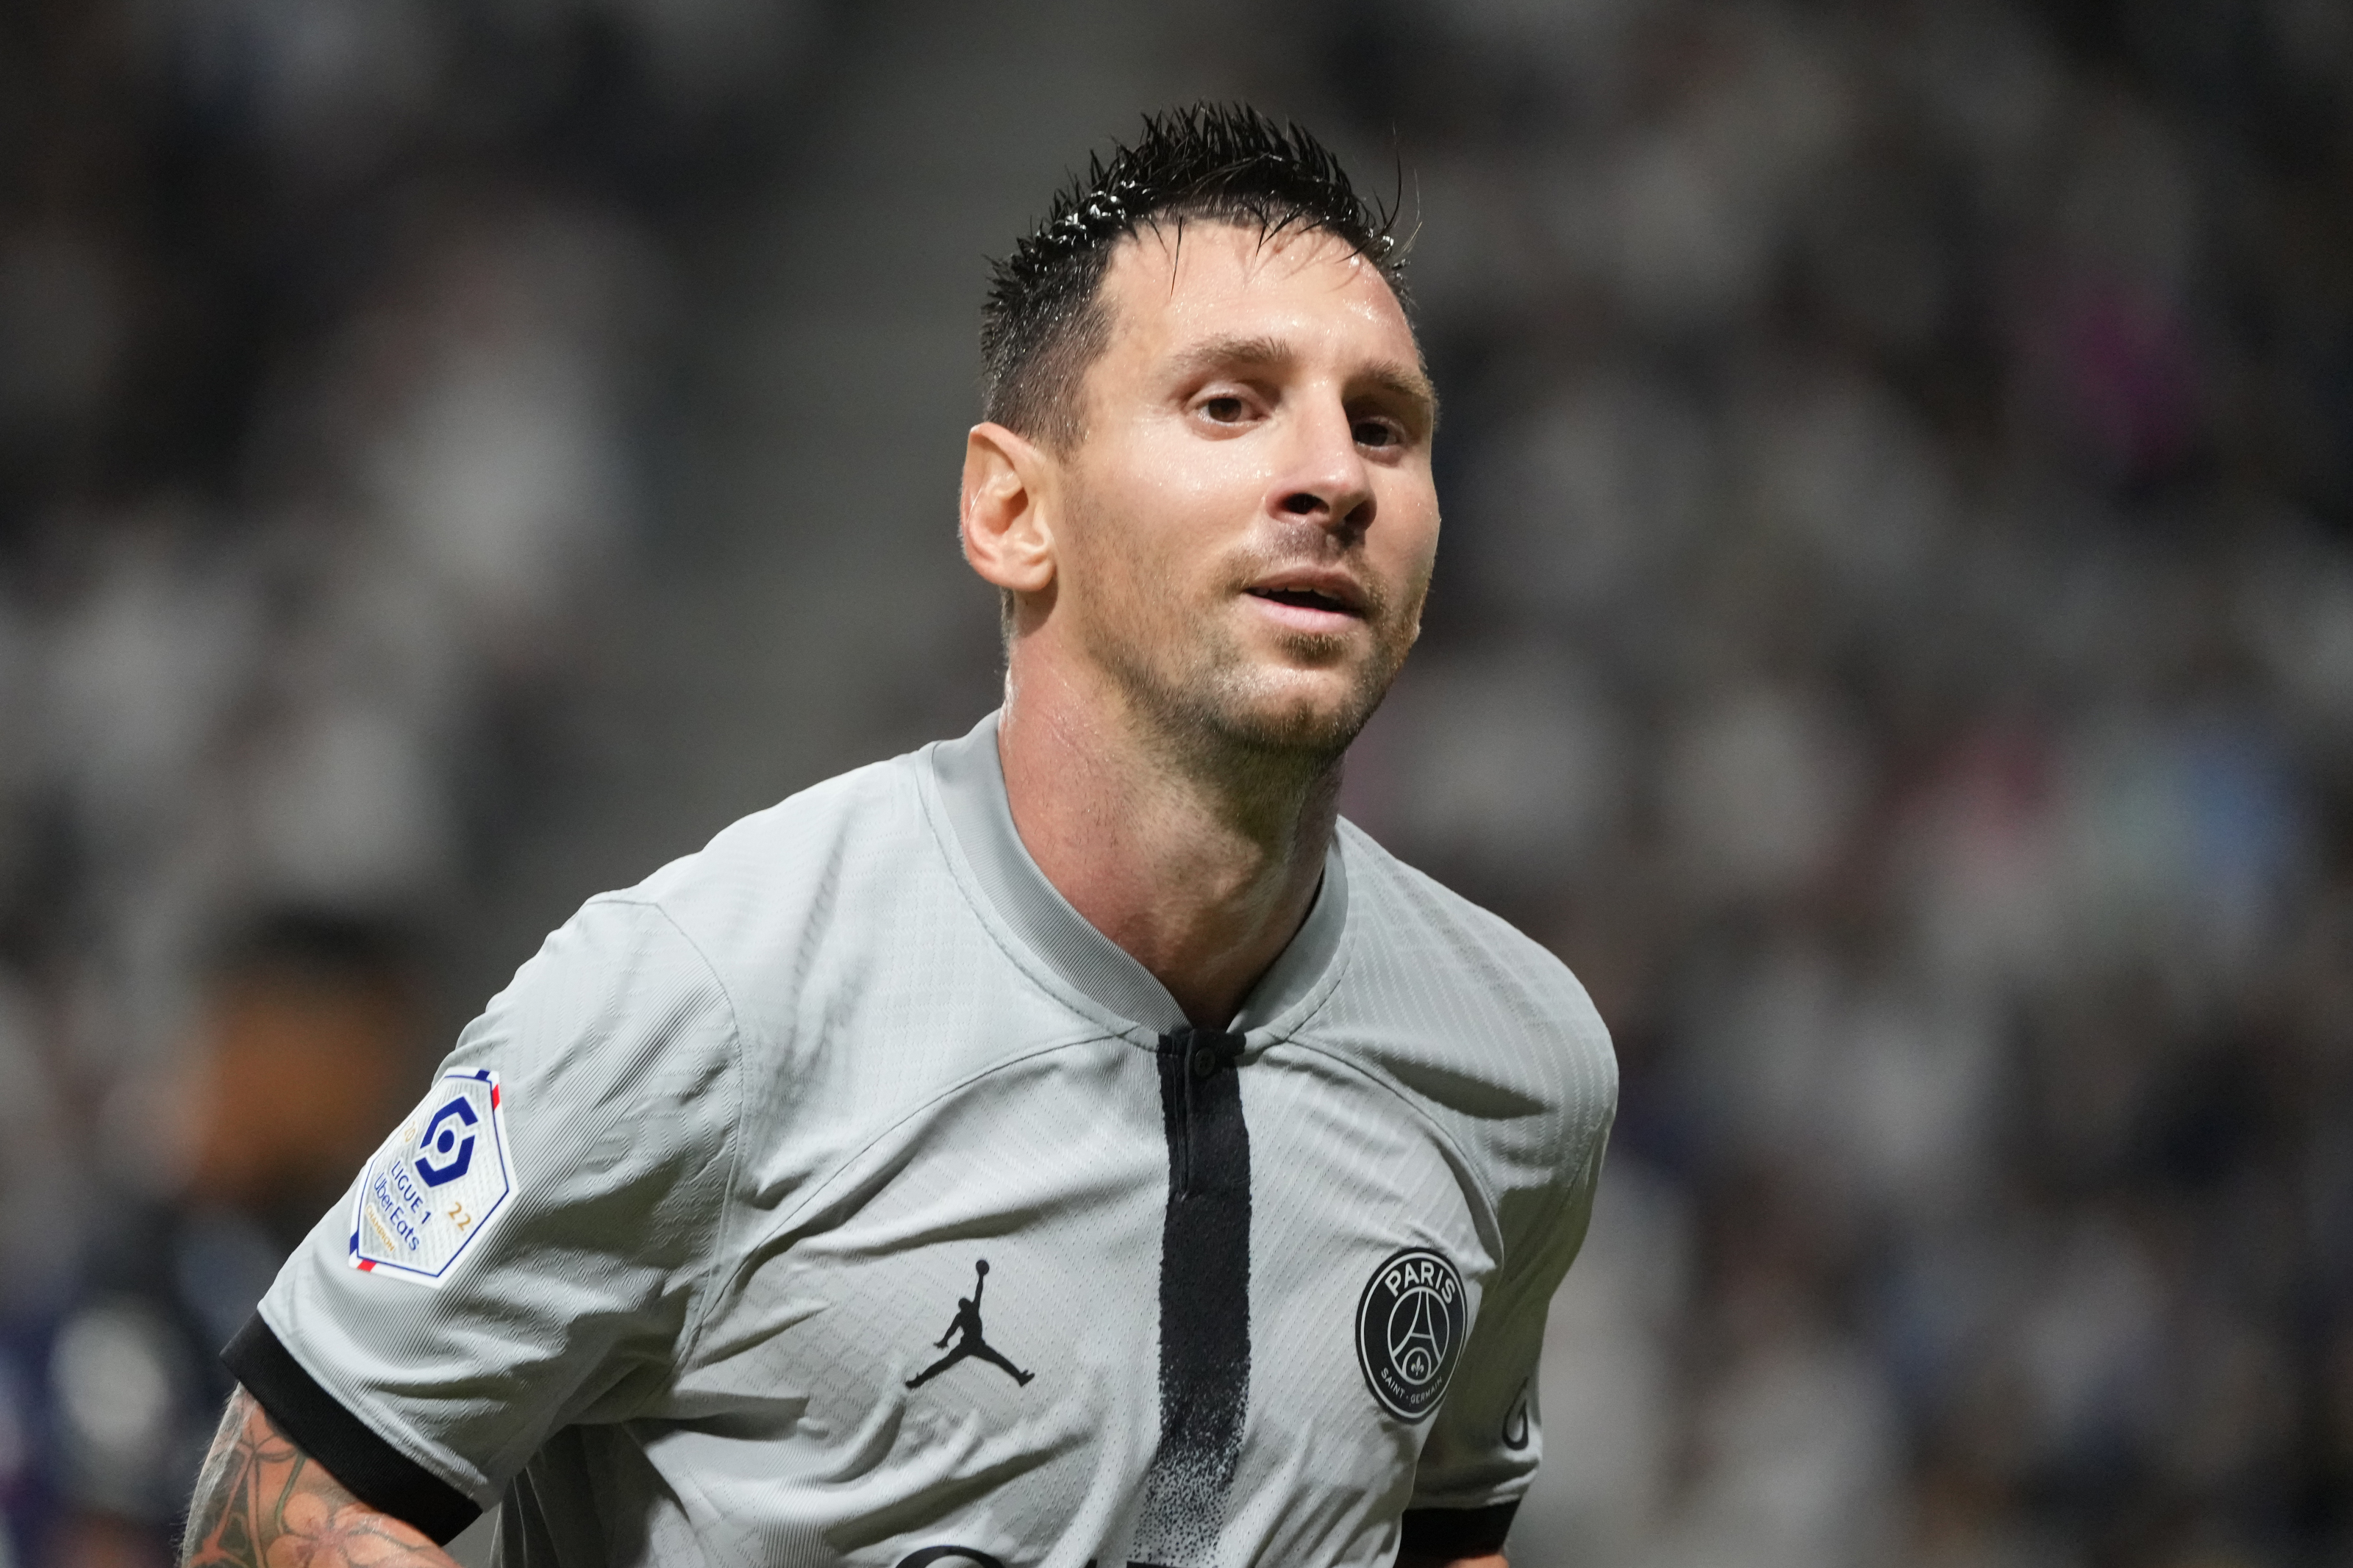 possible clubs Leo Messi can join in 2023 if he leaves PSG